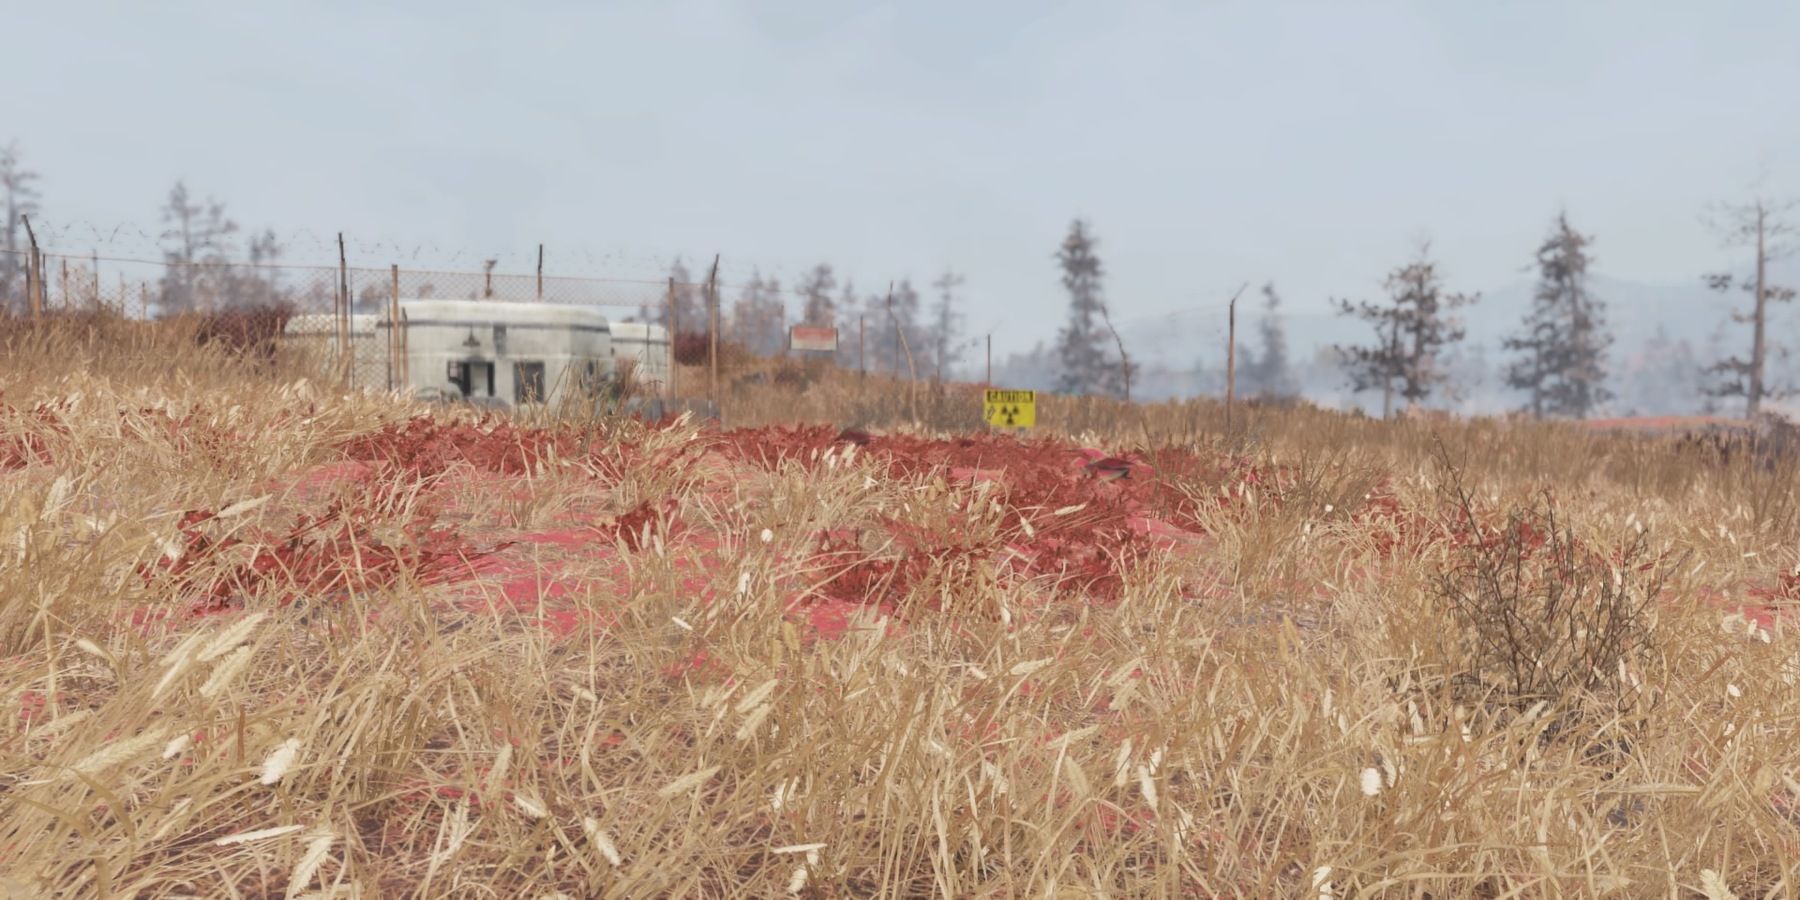 Drop Site V9 in Fallout 76